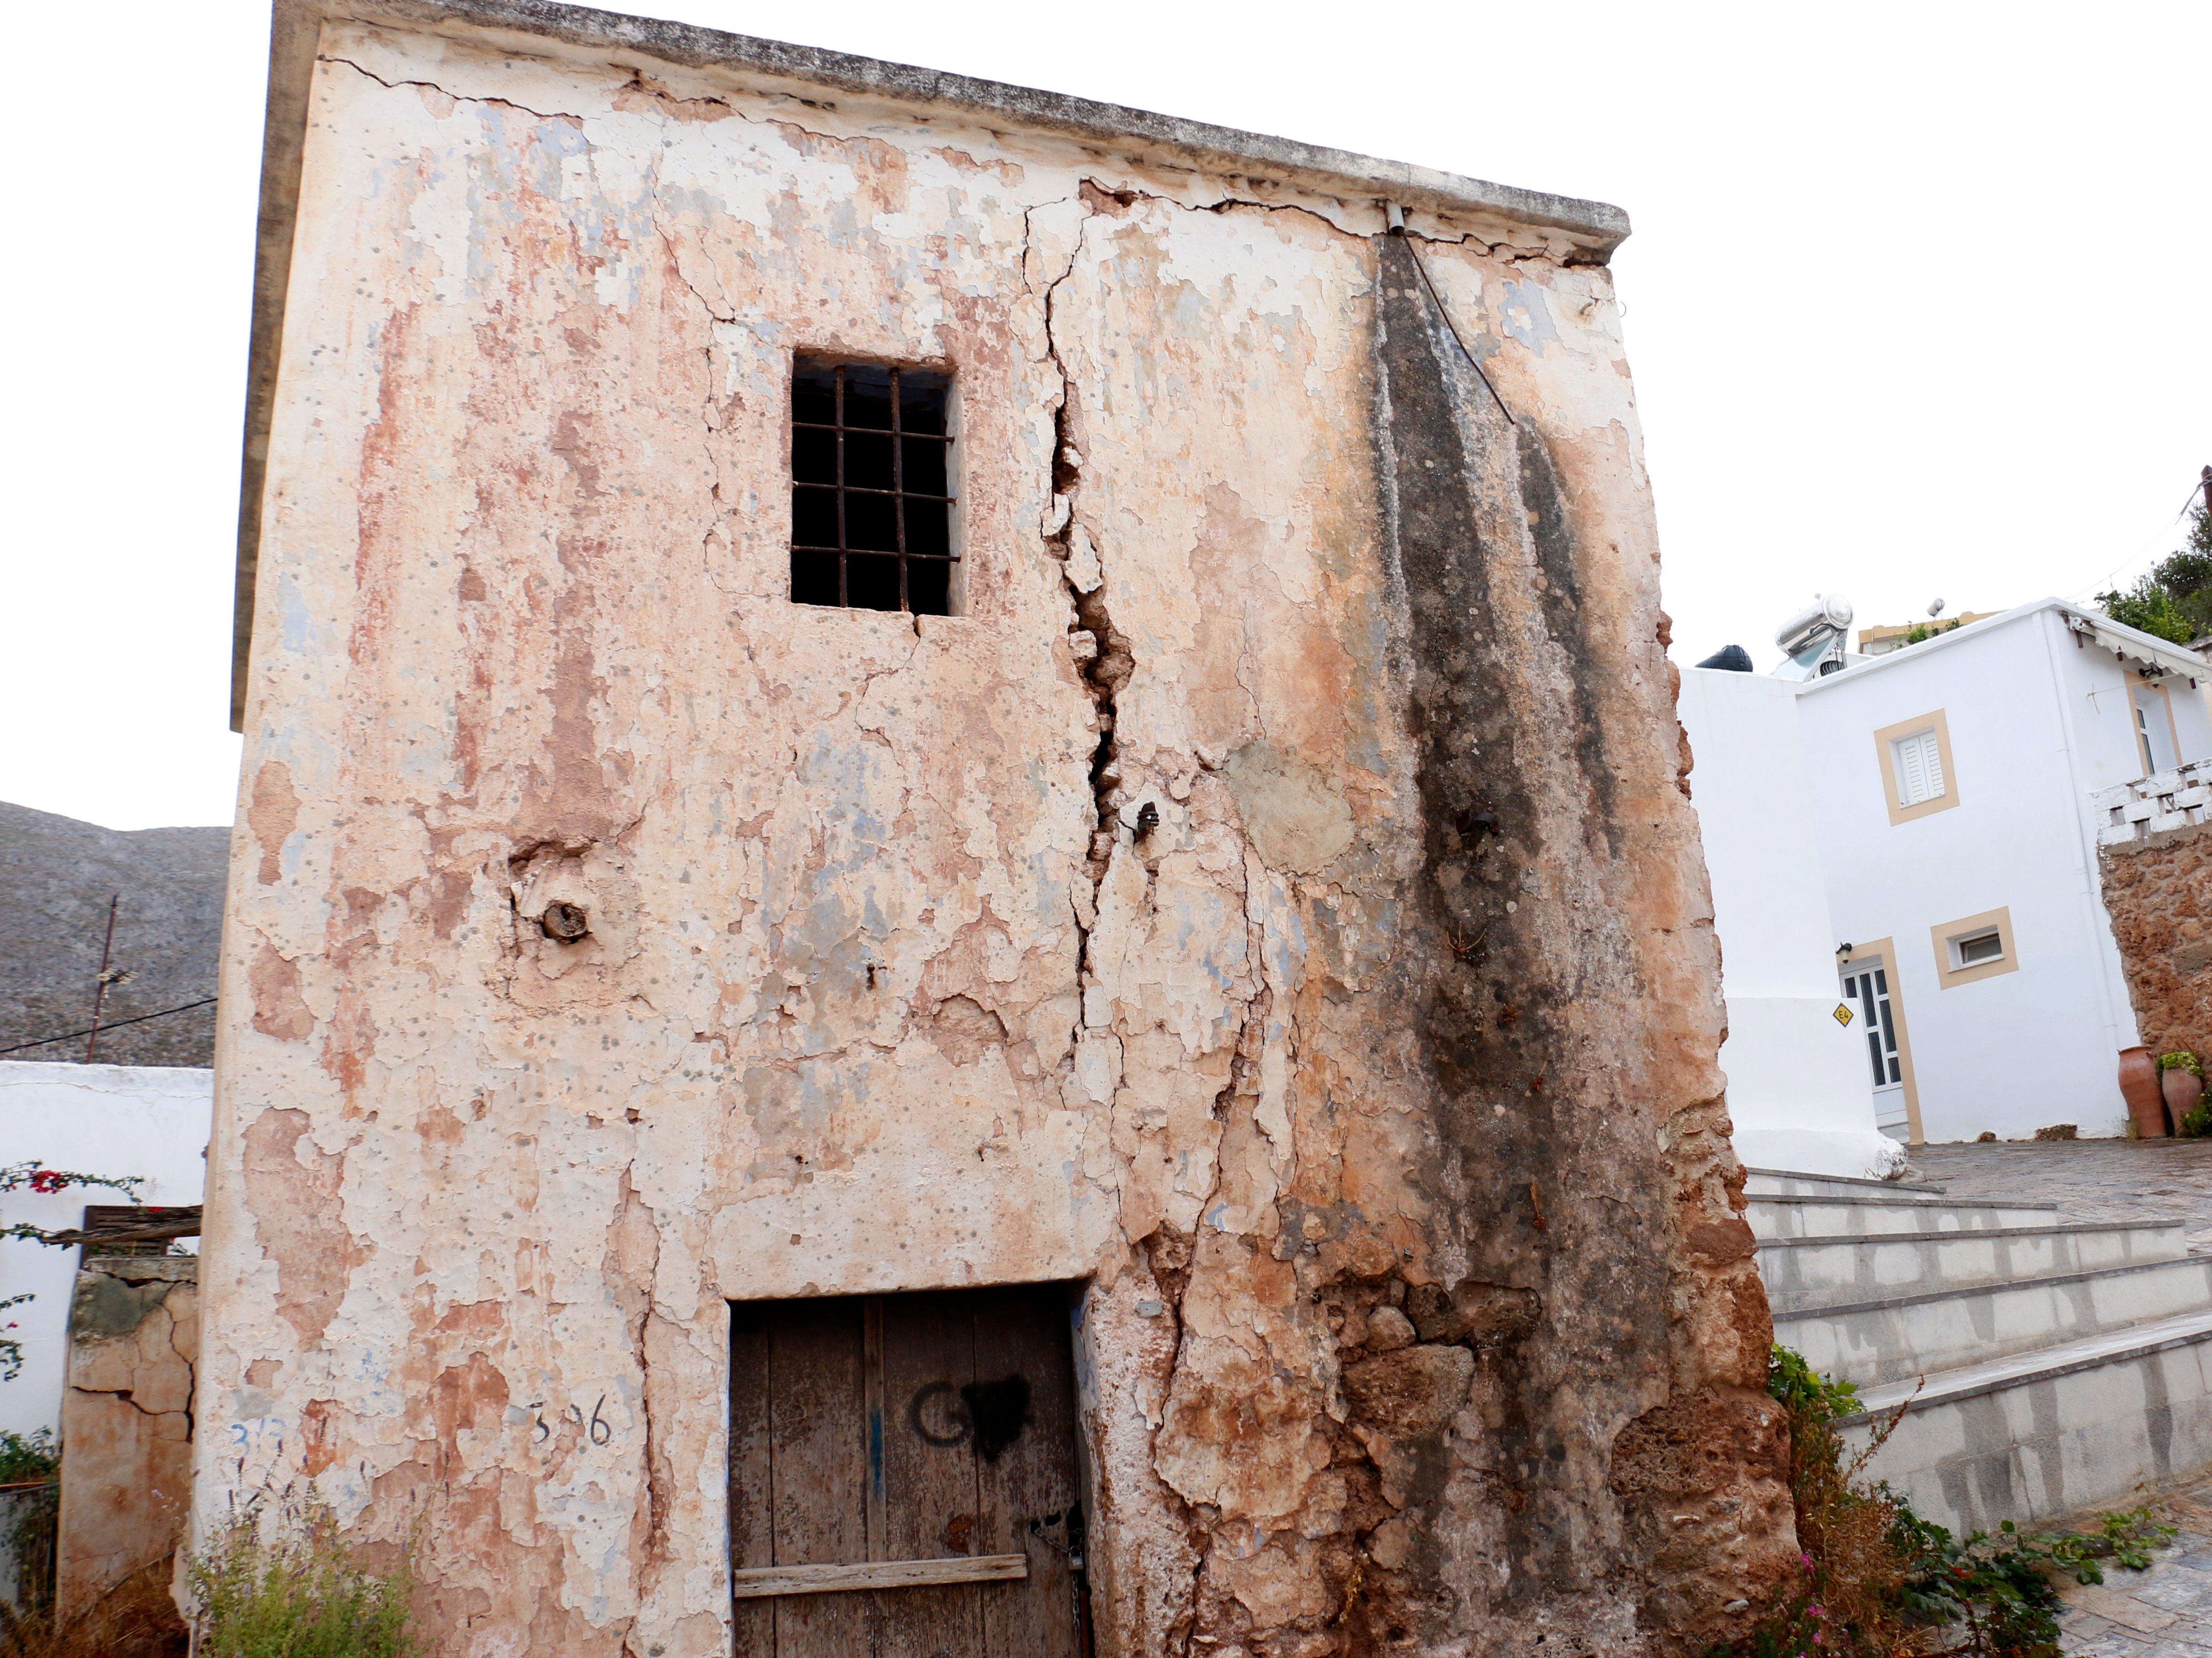 Damage done to an old house in Zakros village, near Sitia